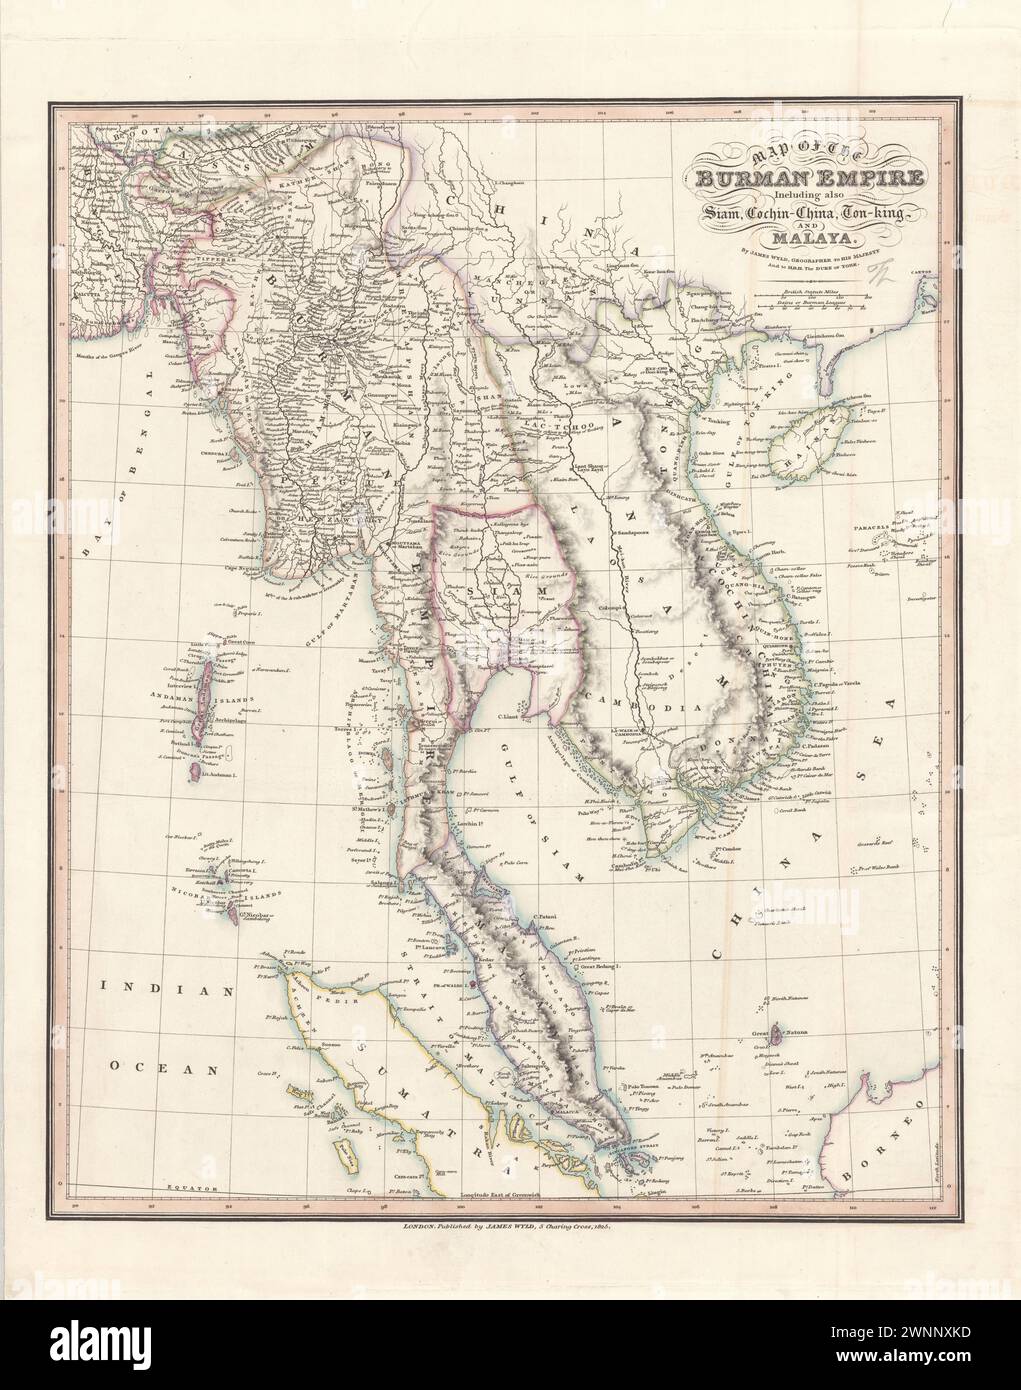 Vintage Geographic Map . Map of the Burman Empire including also Siam, Cochin-China, Ton-King and Malaya / by James Wyld, Geographer to His Majesty.  1825 Stock Photo